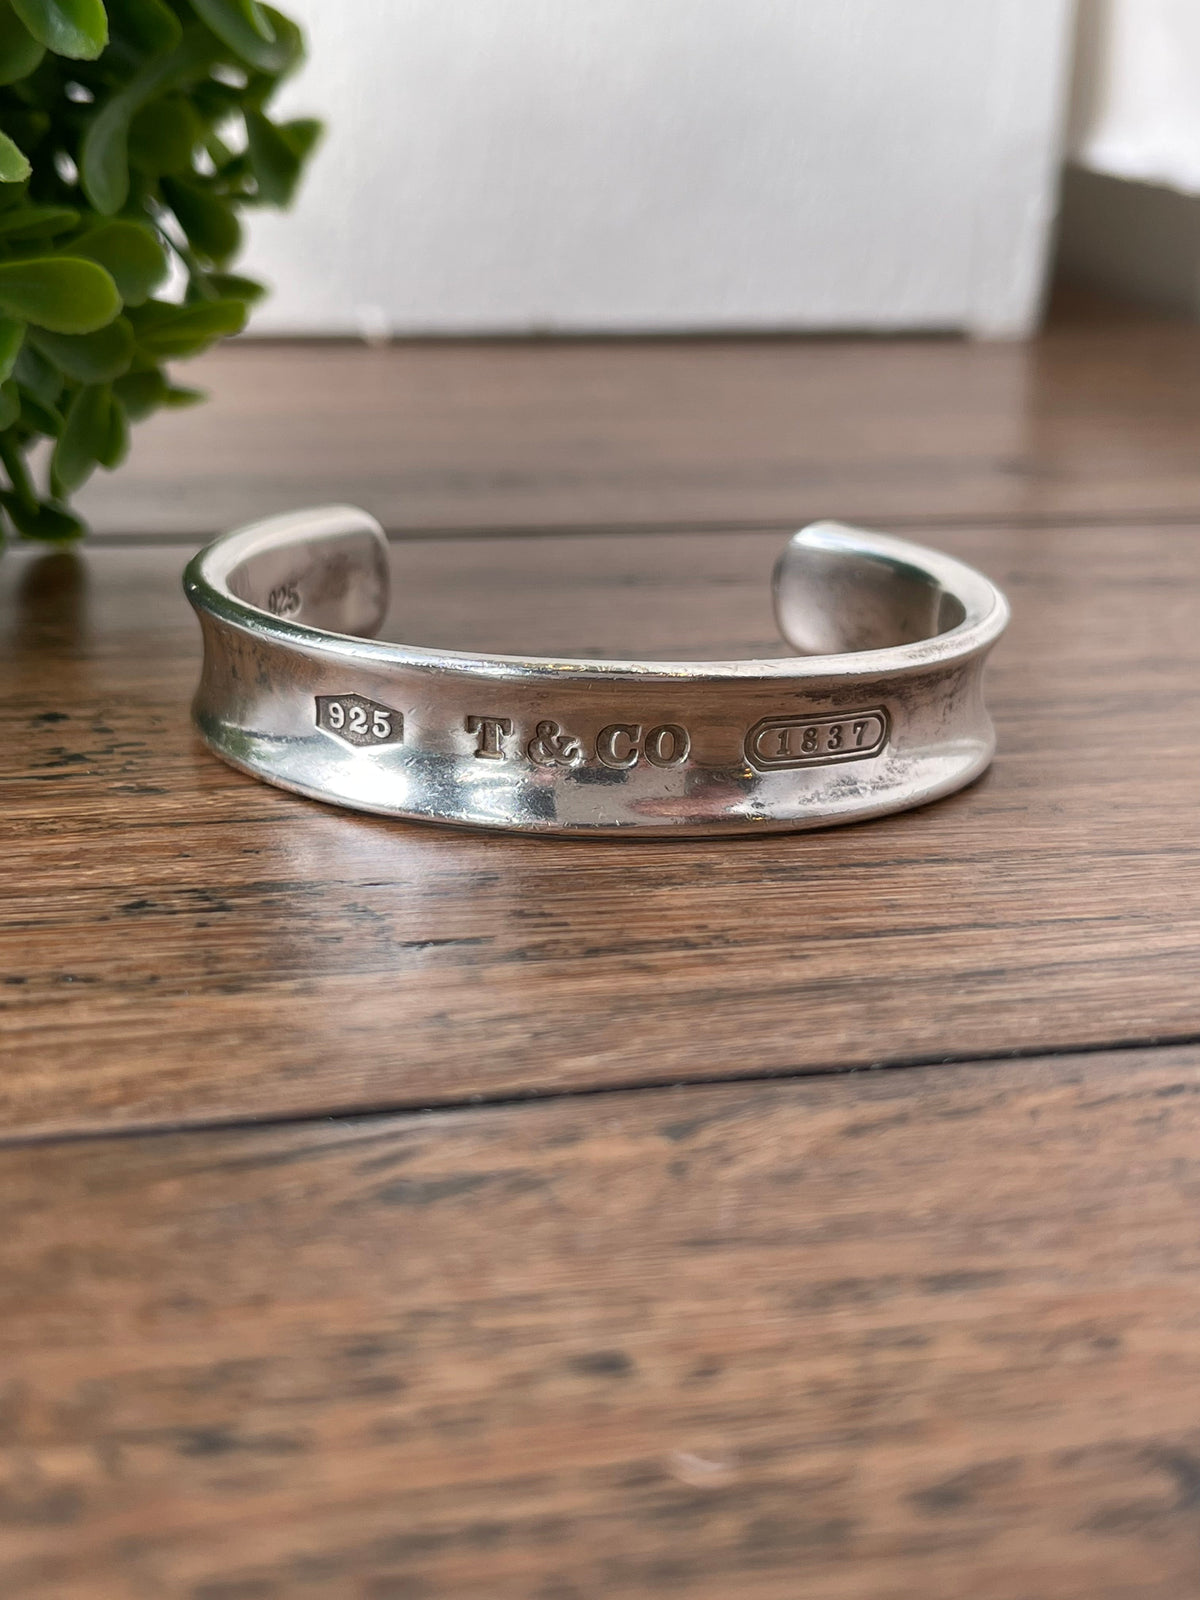 Vintage Authentic Tiffany Co. 1837 Sterling Silver 925 -   Tiffany  bracelet silver, Tiffany and co bracelet, Tiffany bangle